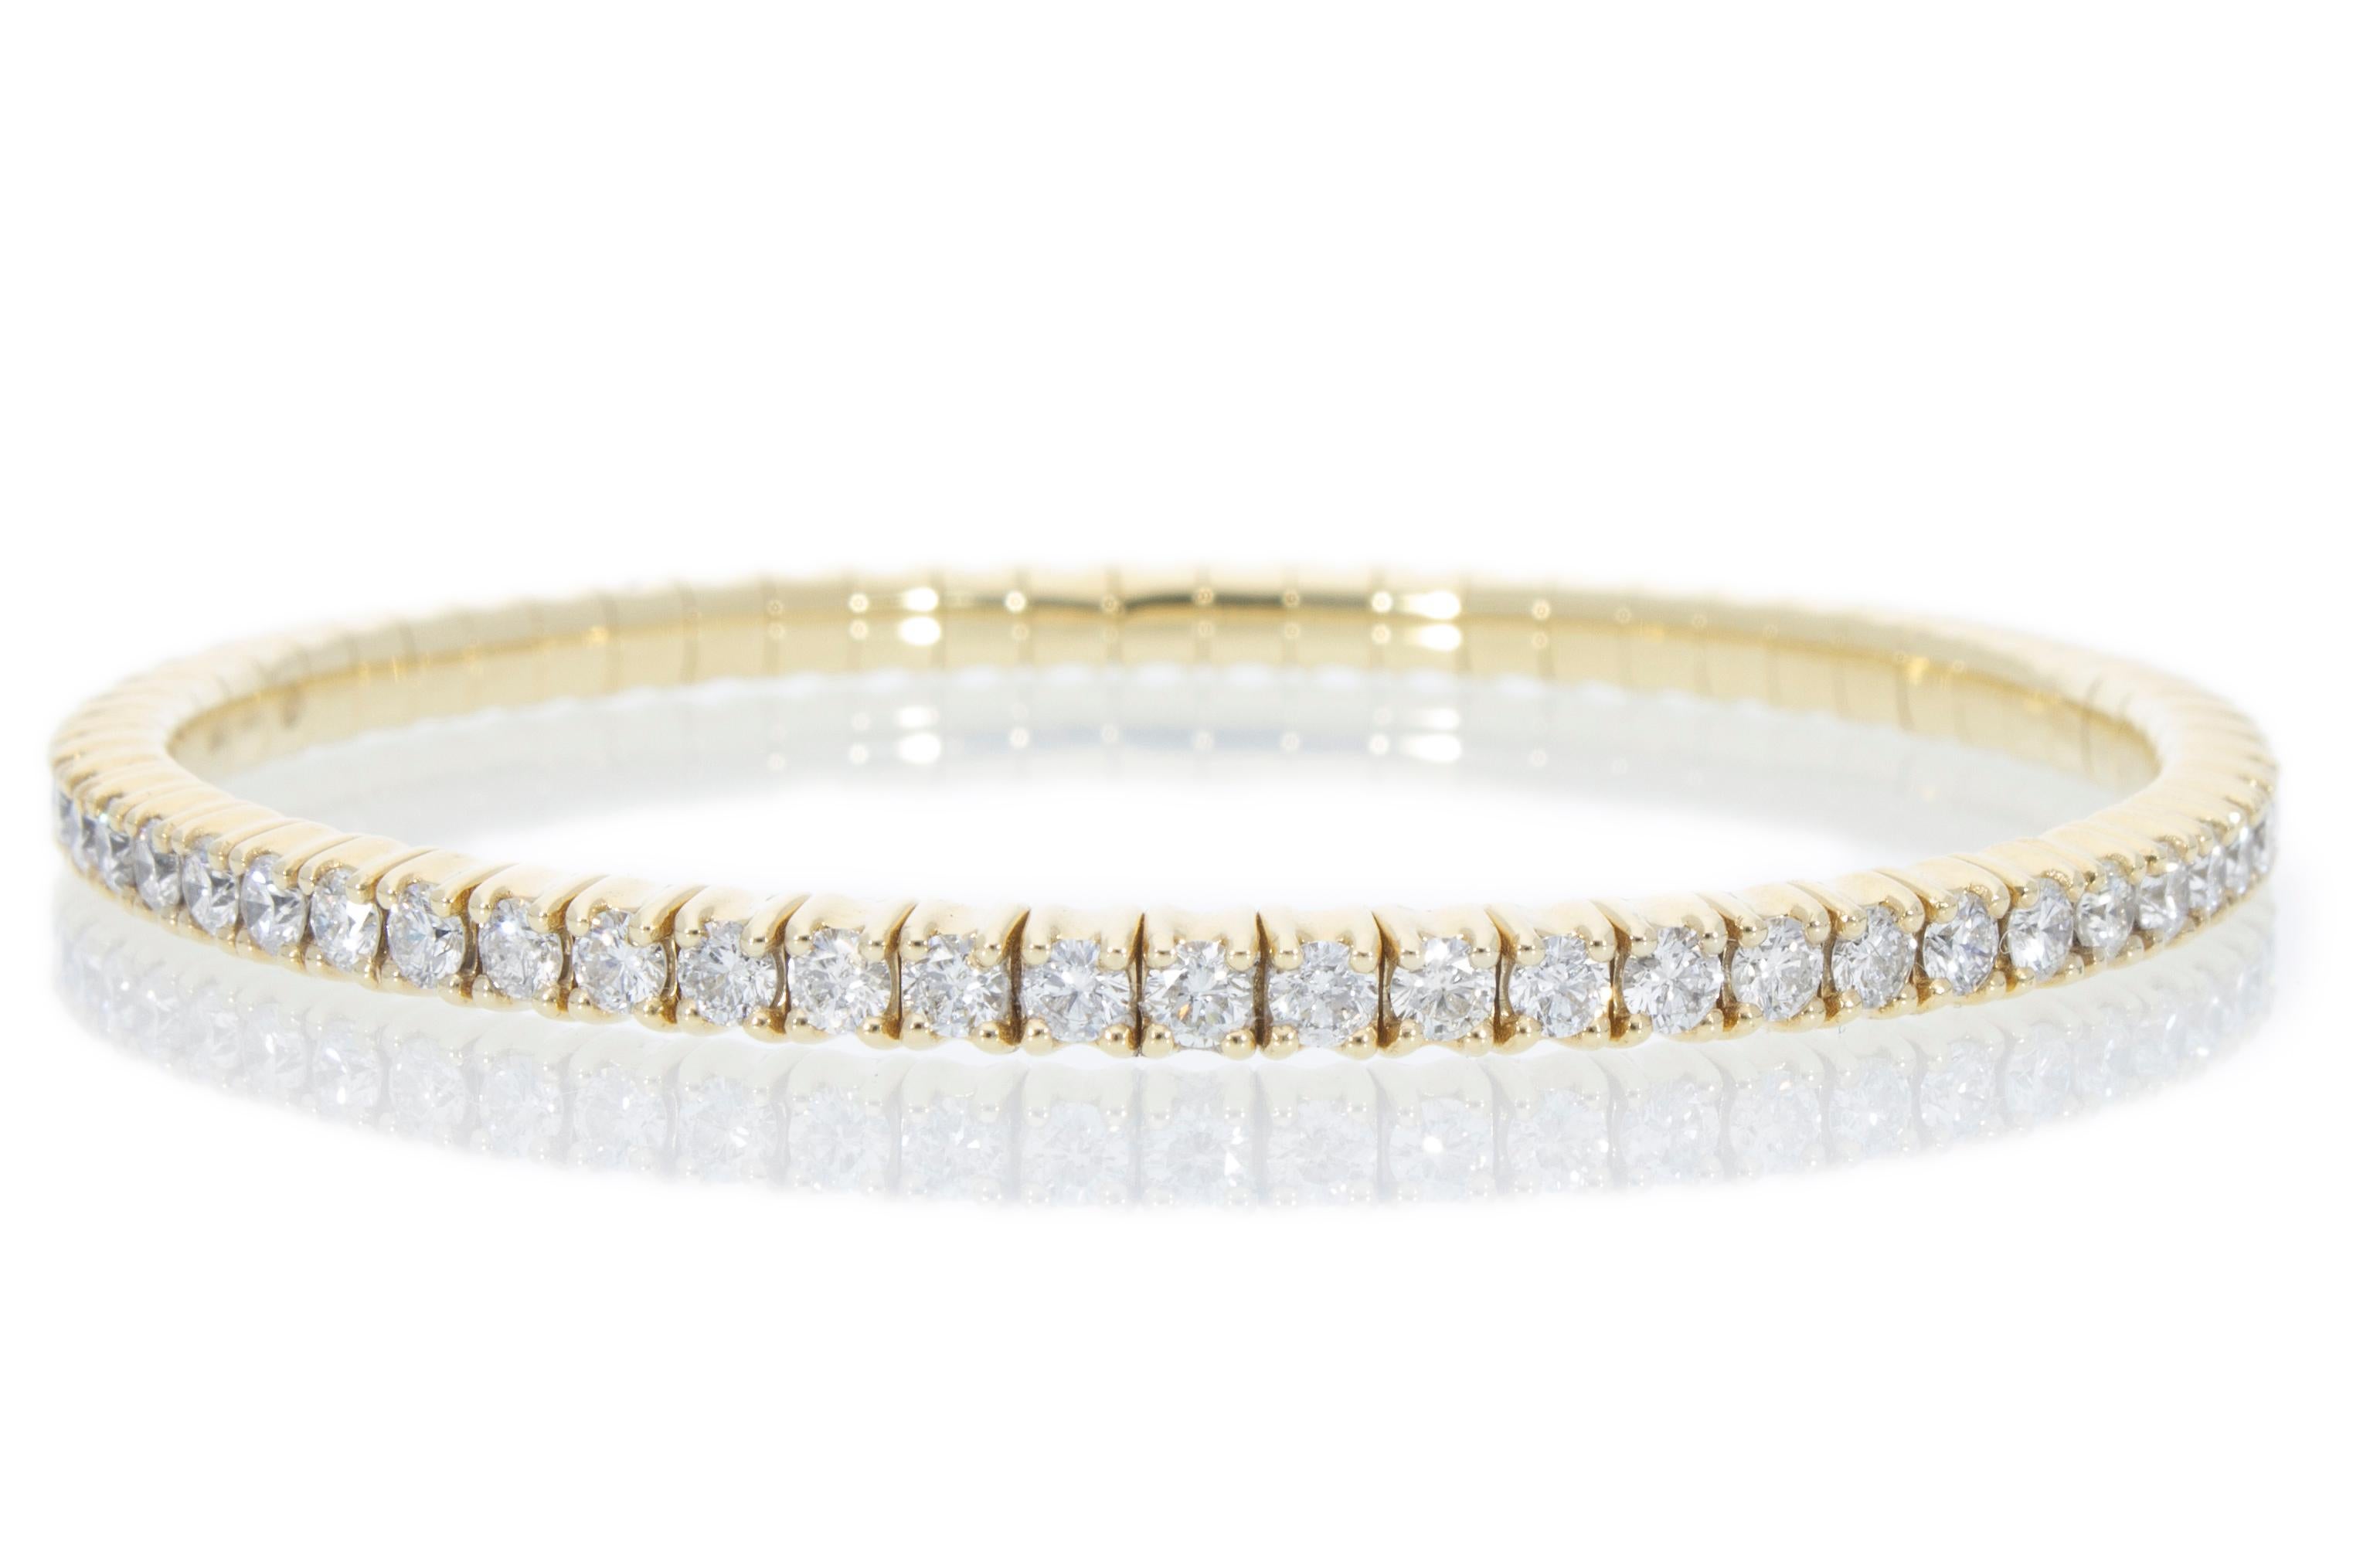 Carat 4.30 Elastic Diamond Tennis Bracelet. Yellow Gold 18 Kt. Made in Italy. For Sale 4